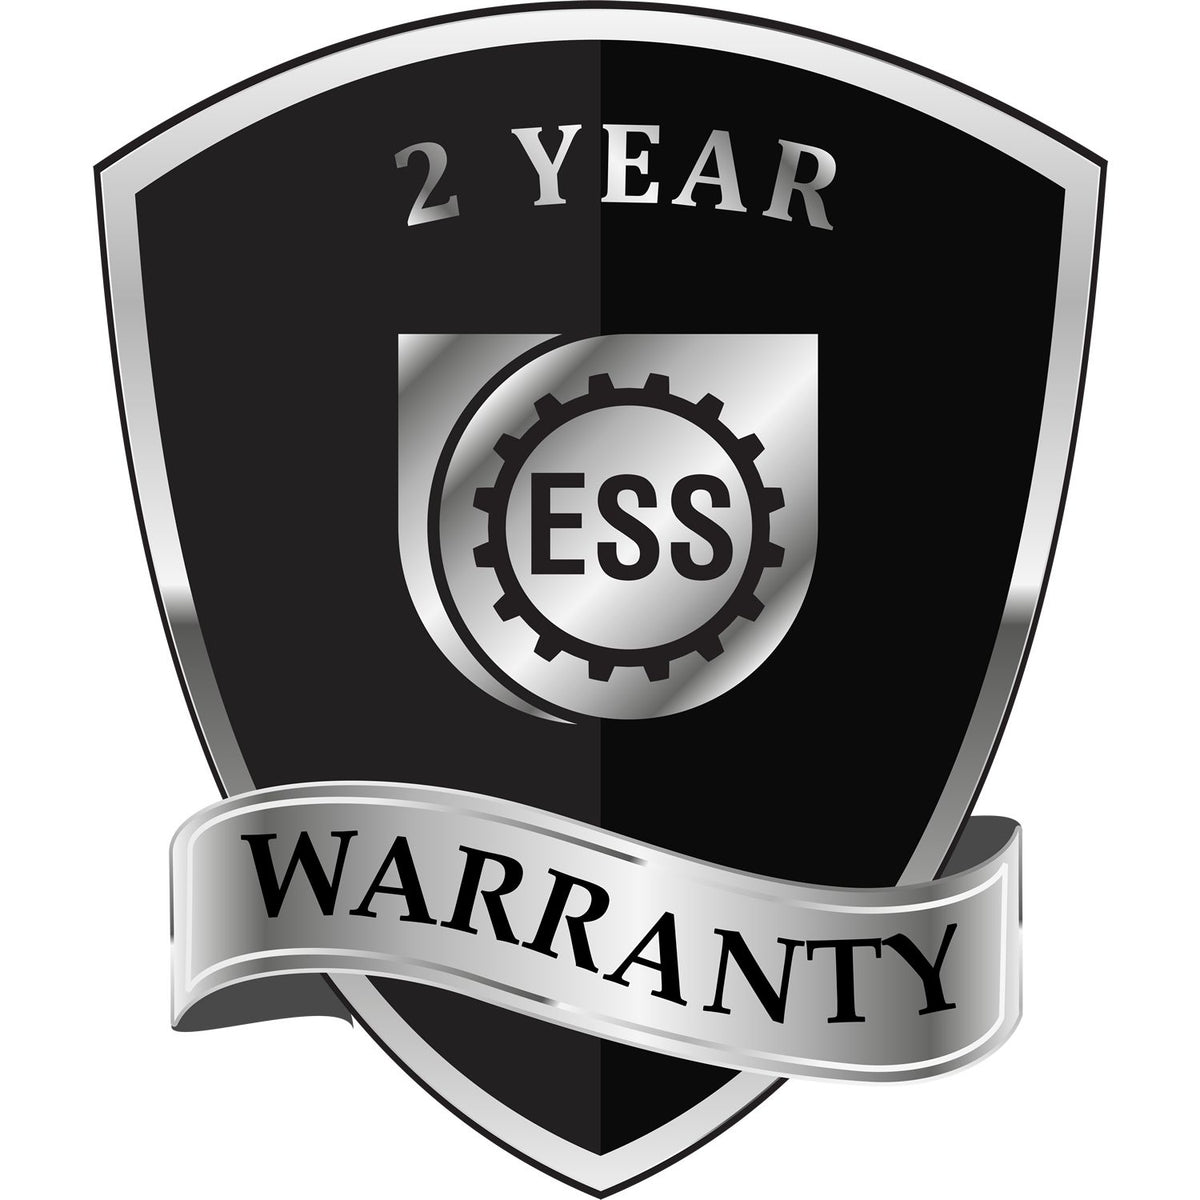 A badge or emblem showing a warranty icon for the Heavy Duty Cast Iron Guam Land Surveyor Seal Embosser